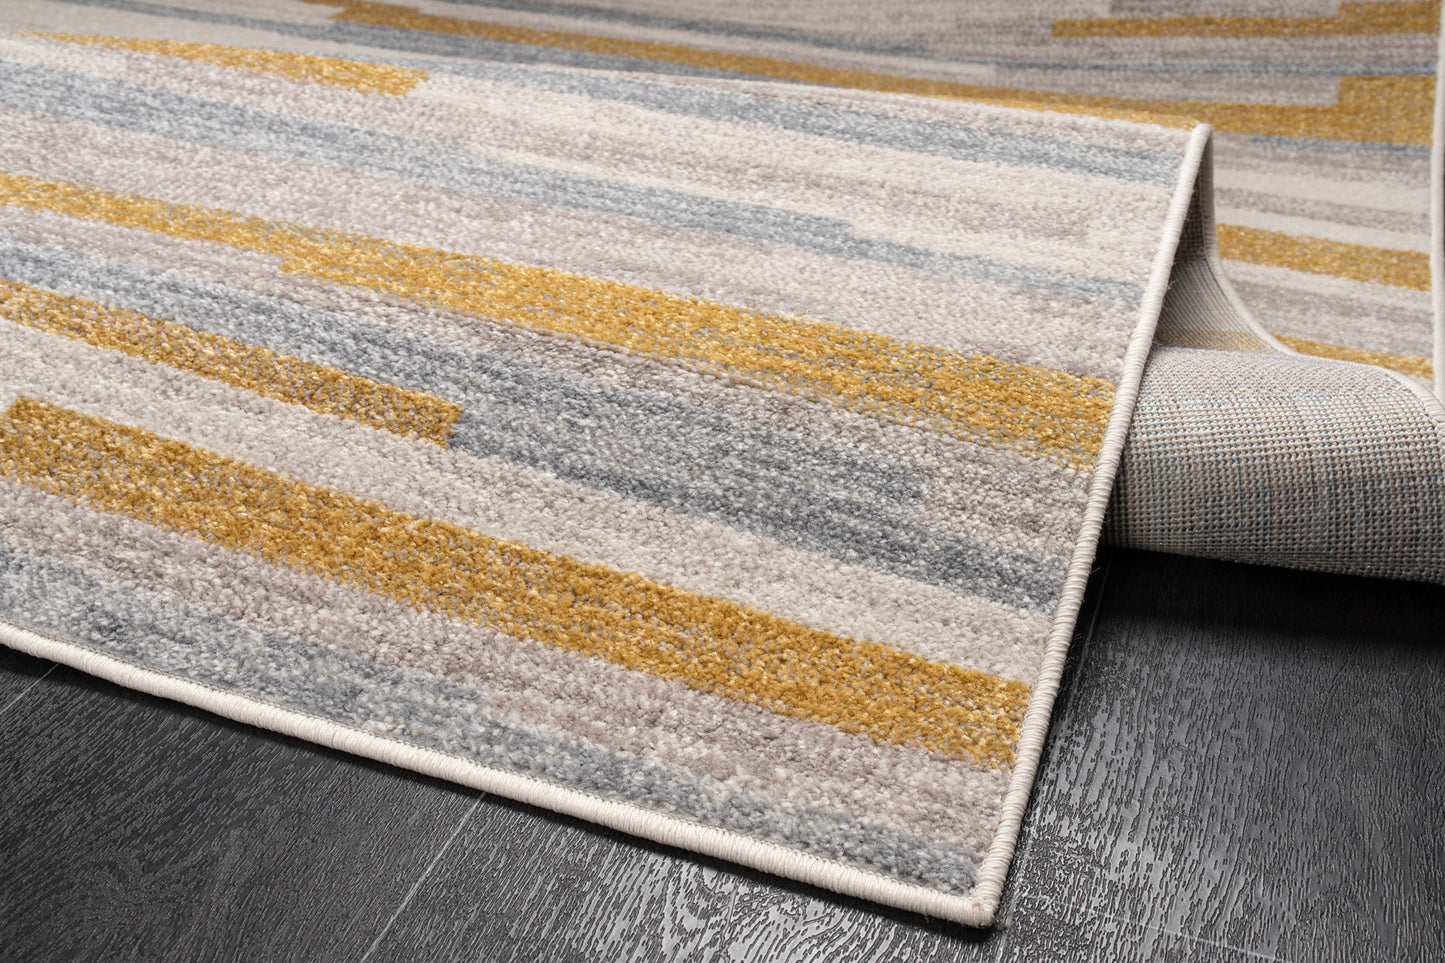 orange grey beige striped abstract rustic minimalist modern contemporary living room area rug 8x10, 8x11 ft Large Living Room Carpet, Bedroom, Kitchen